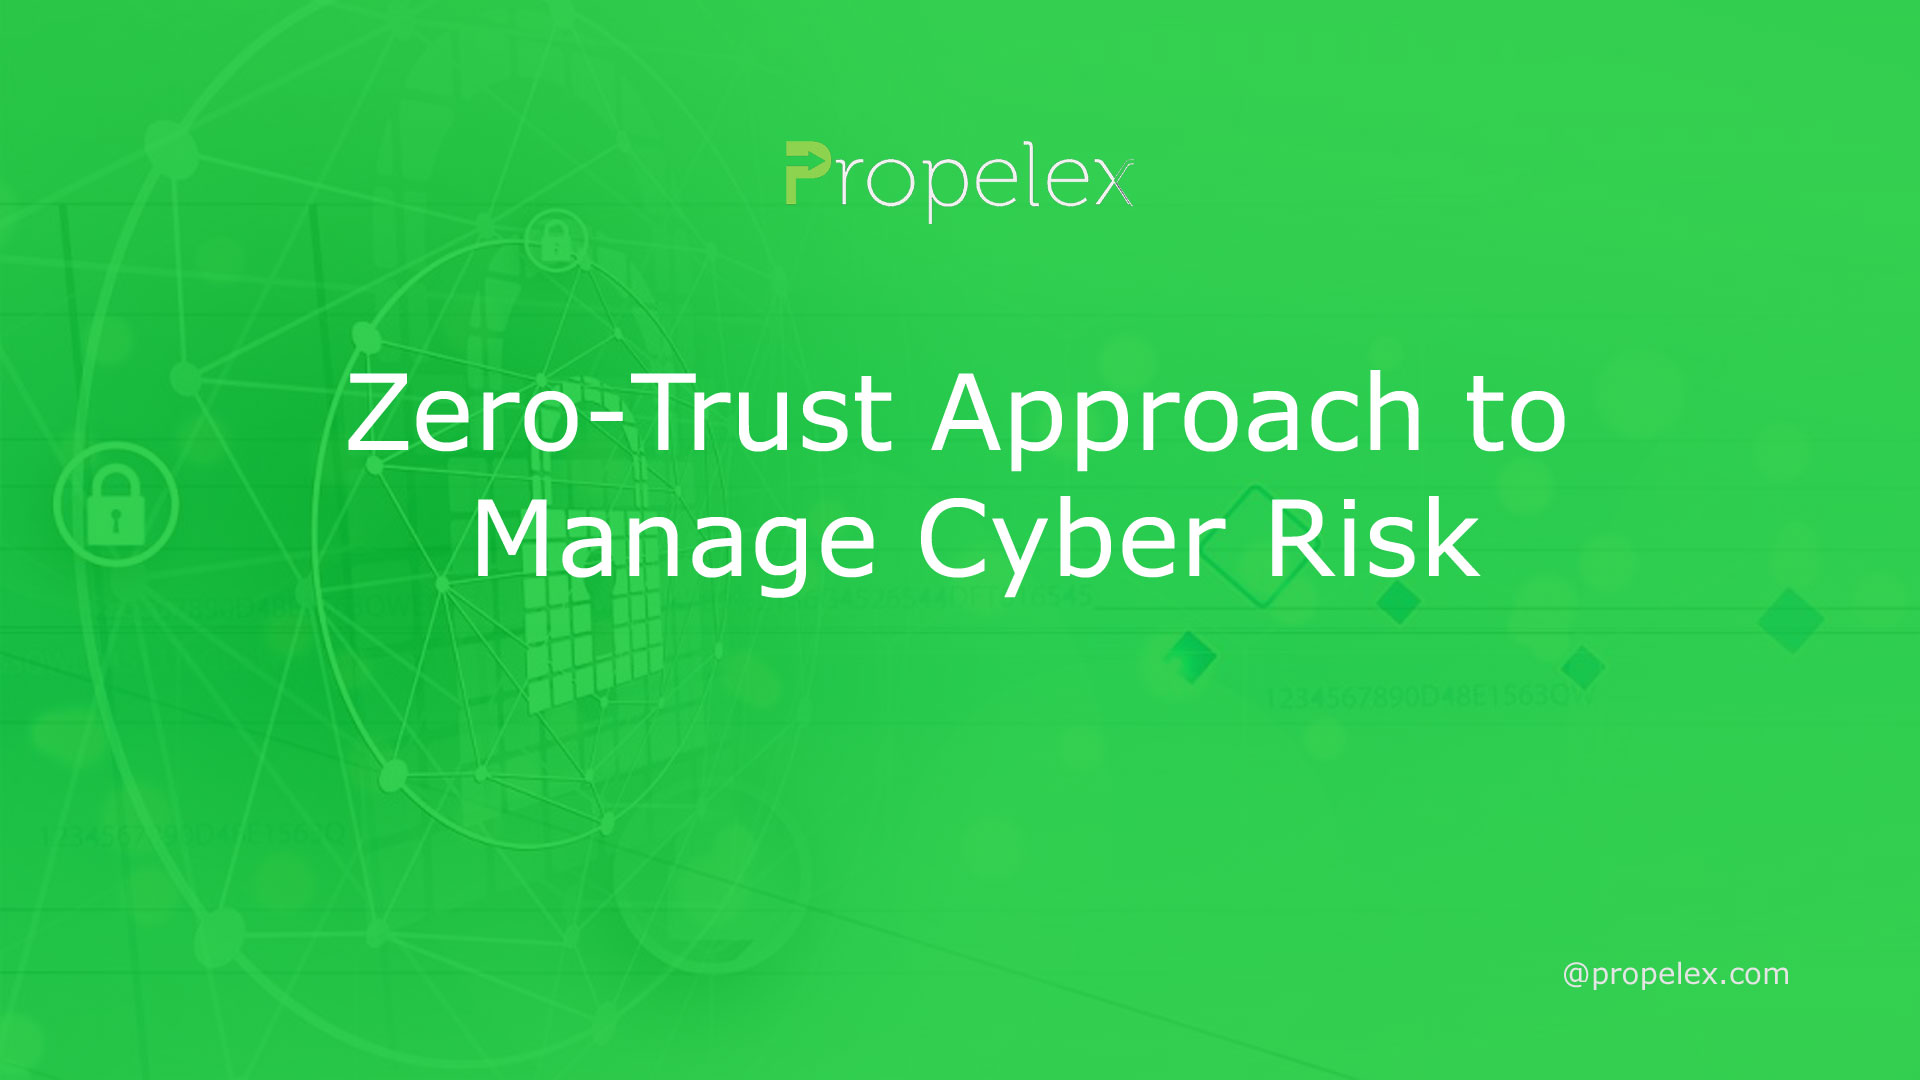 Zero-Trust Approach to Manage Cyber Risk